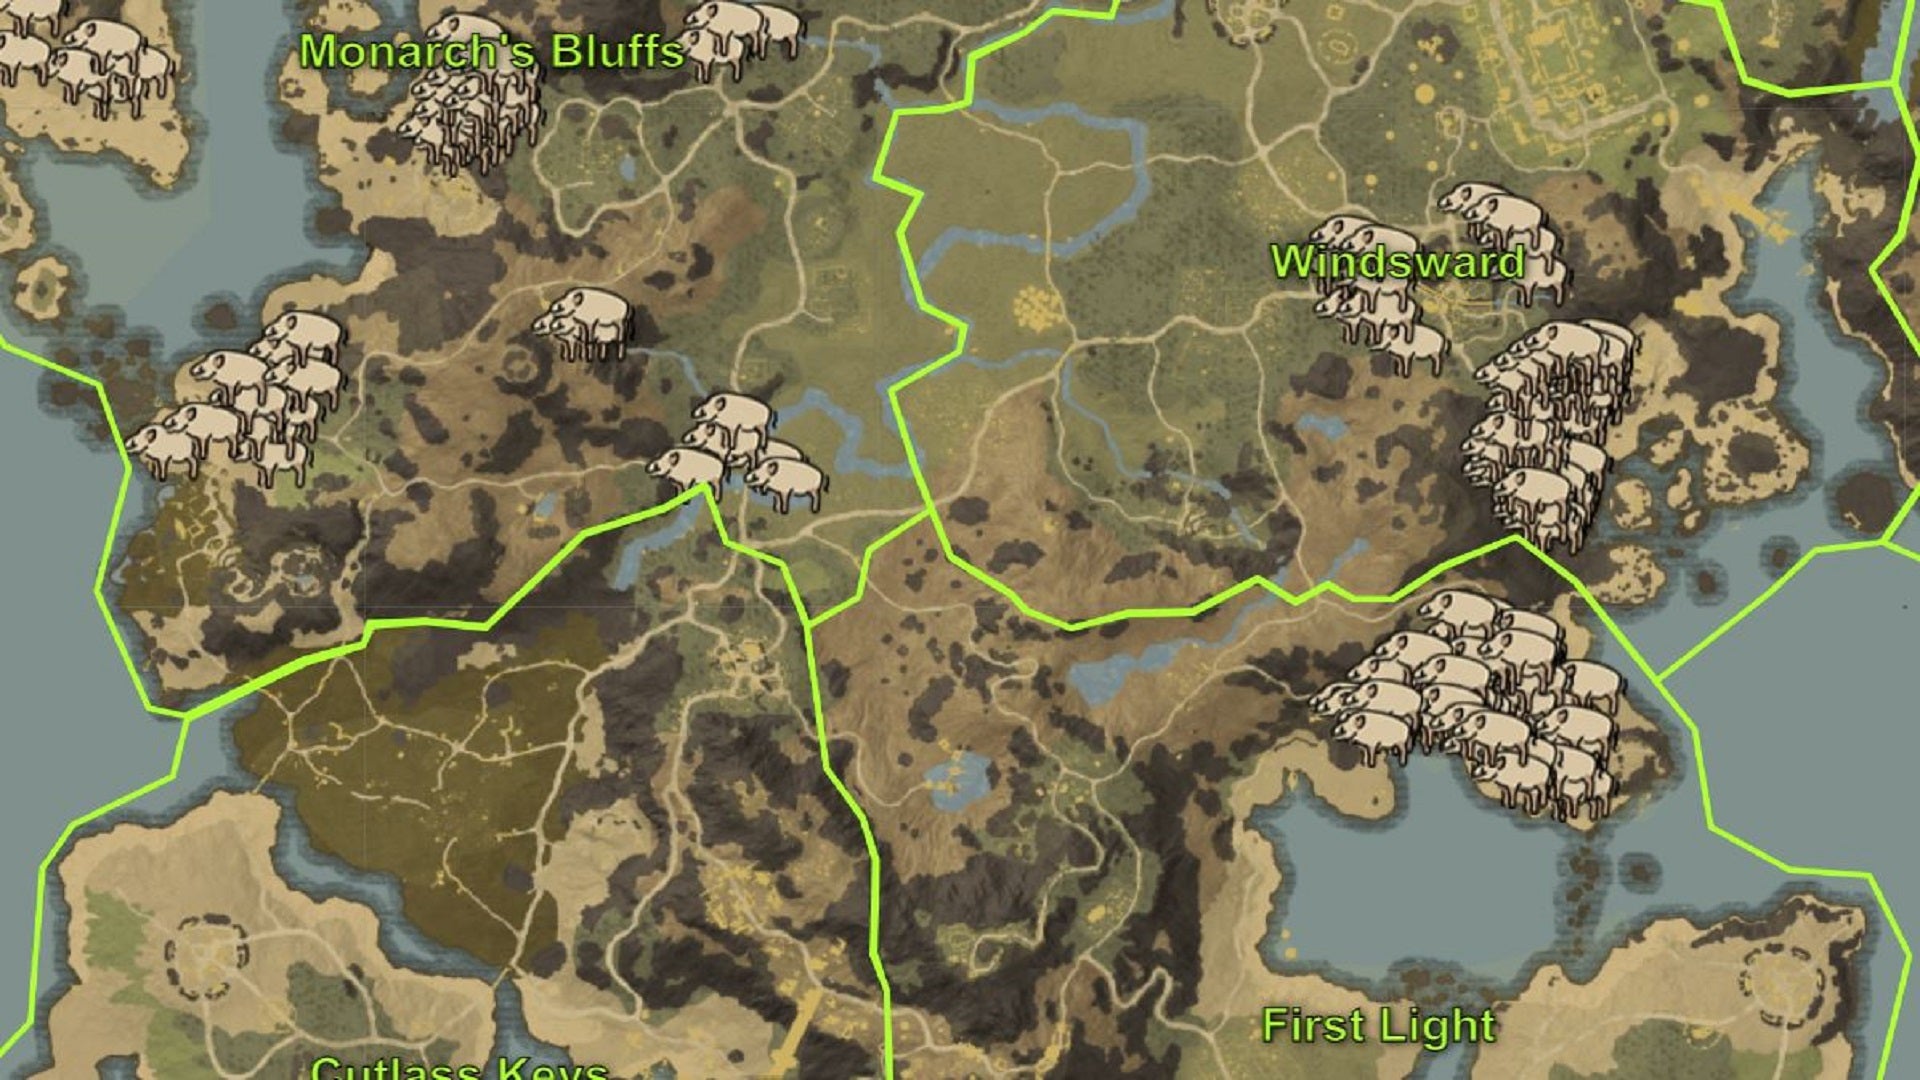 A map of the starting regions in New World, focussing on the boar spawn "farms" in First Light and Windsward.